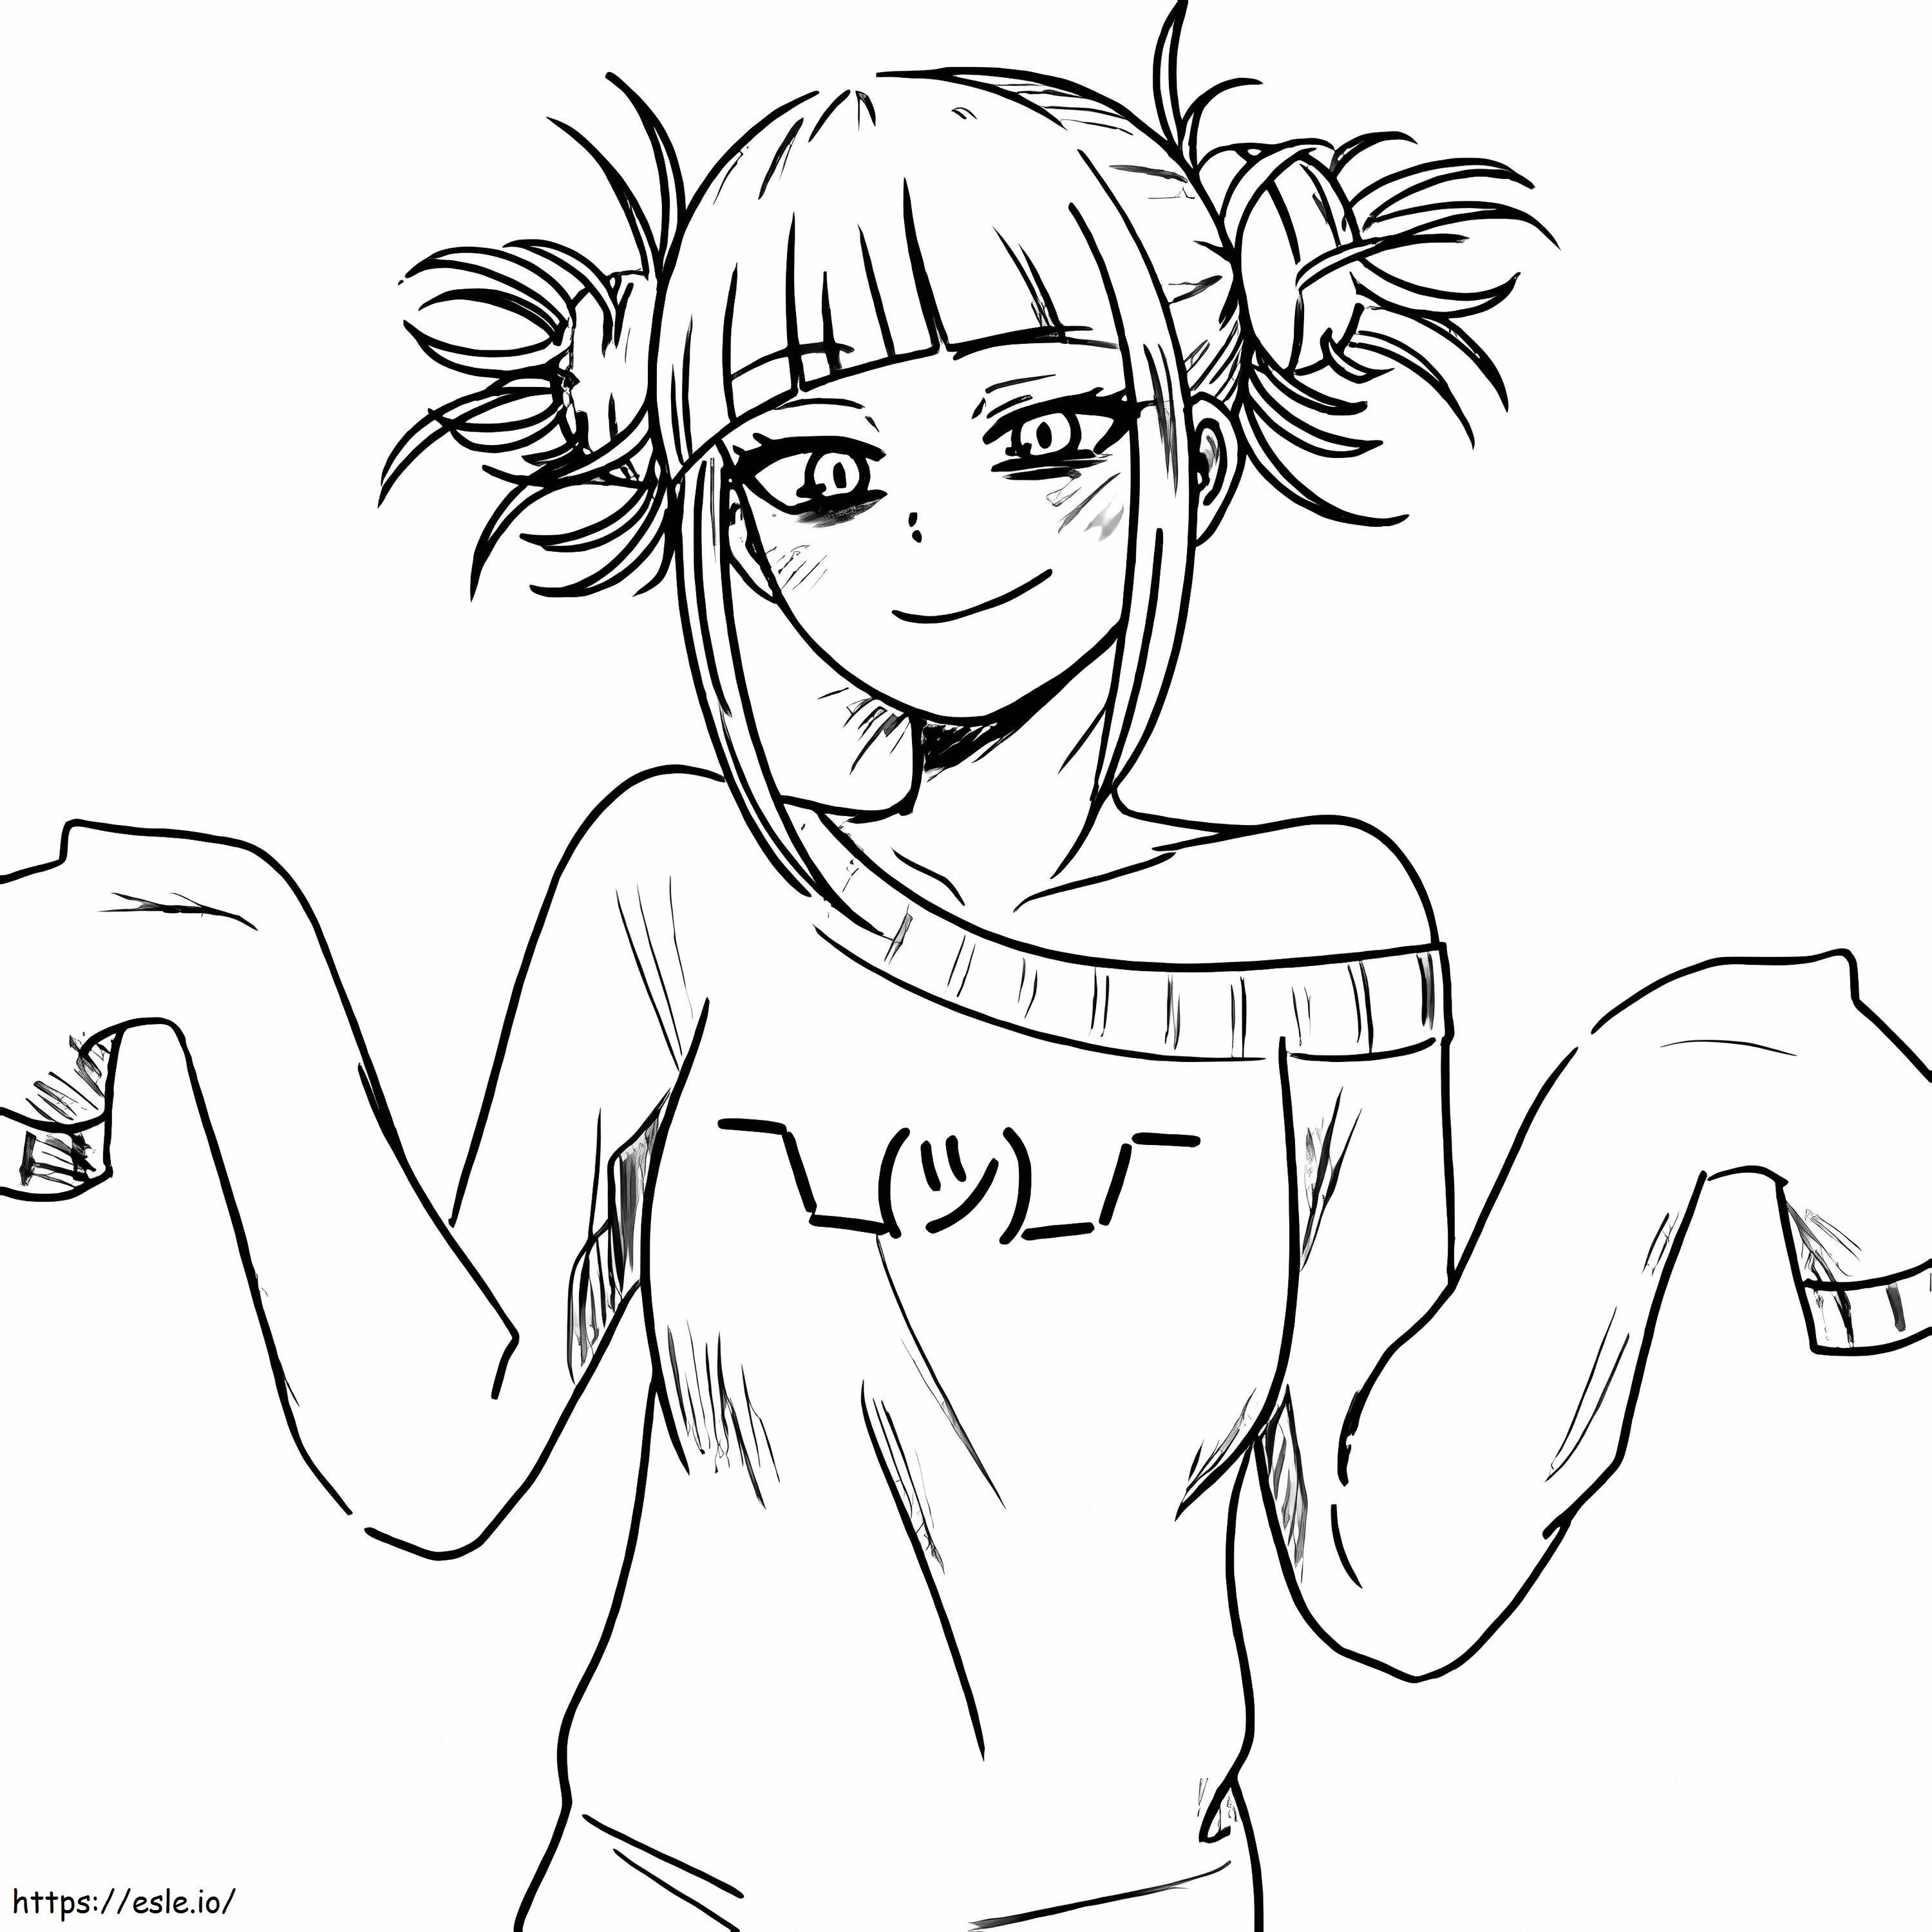 Toga Himiko From My Hero Academy coloring page